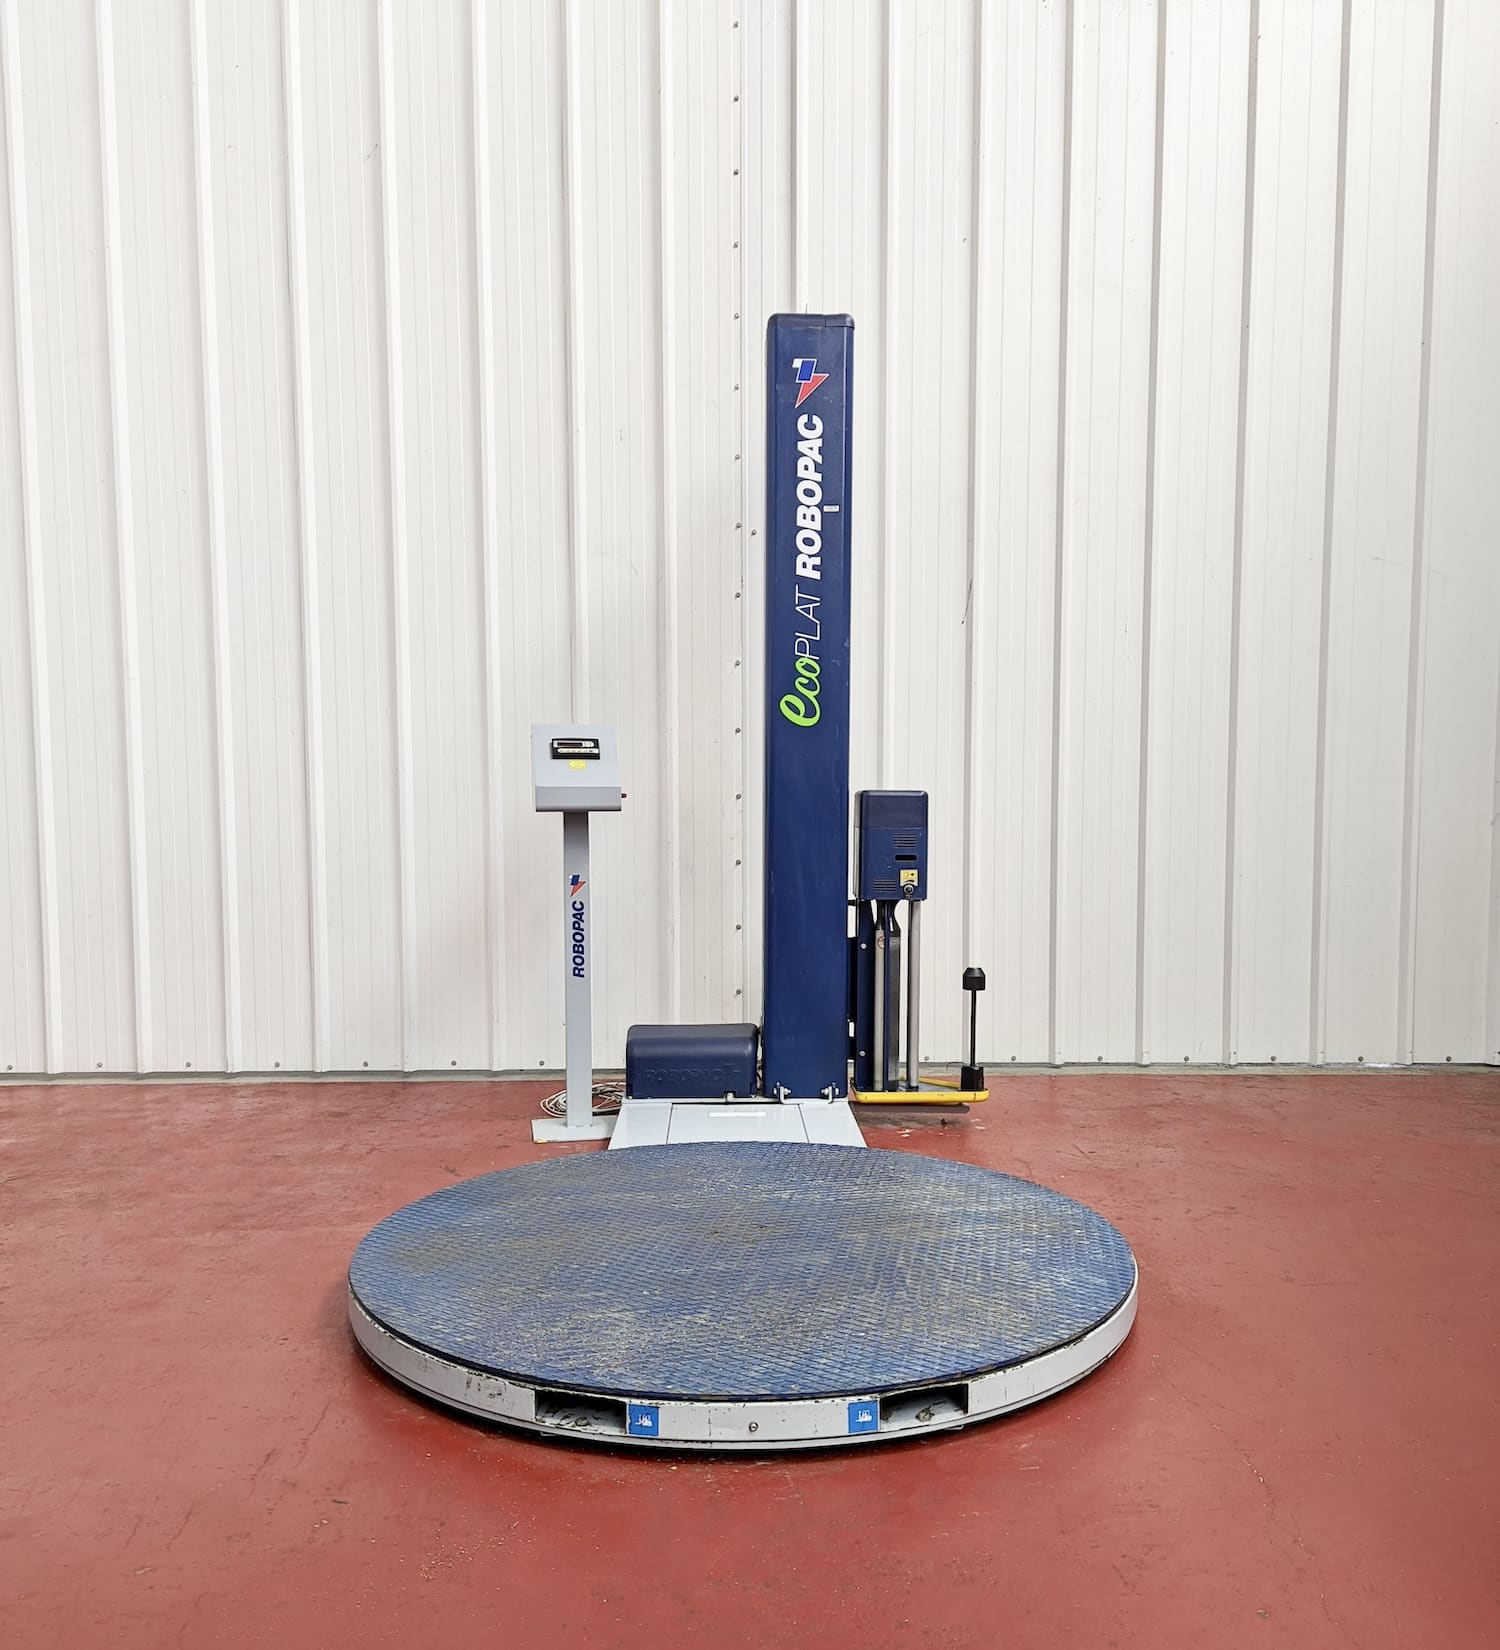 Robopac Ecoplat PPS - Stretch wrapper with weighing unit